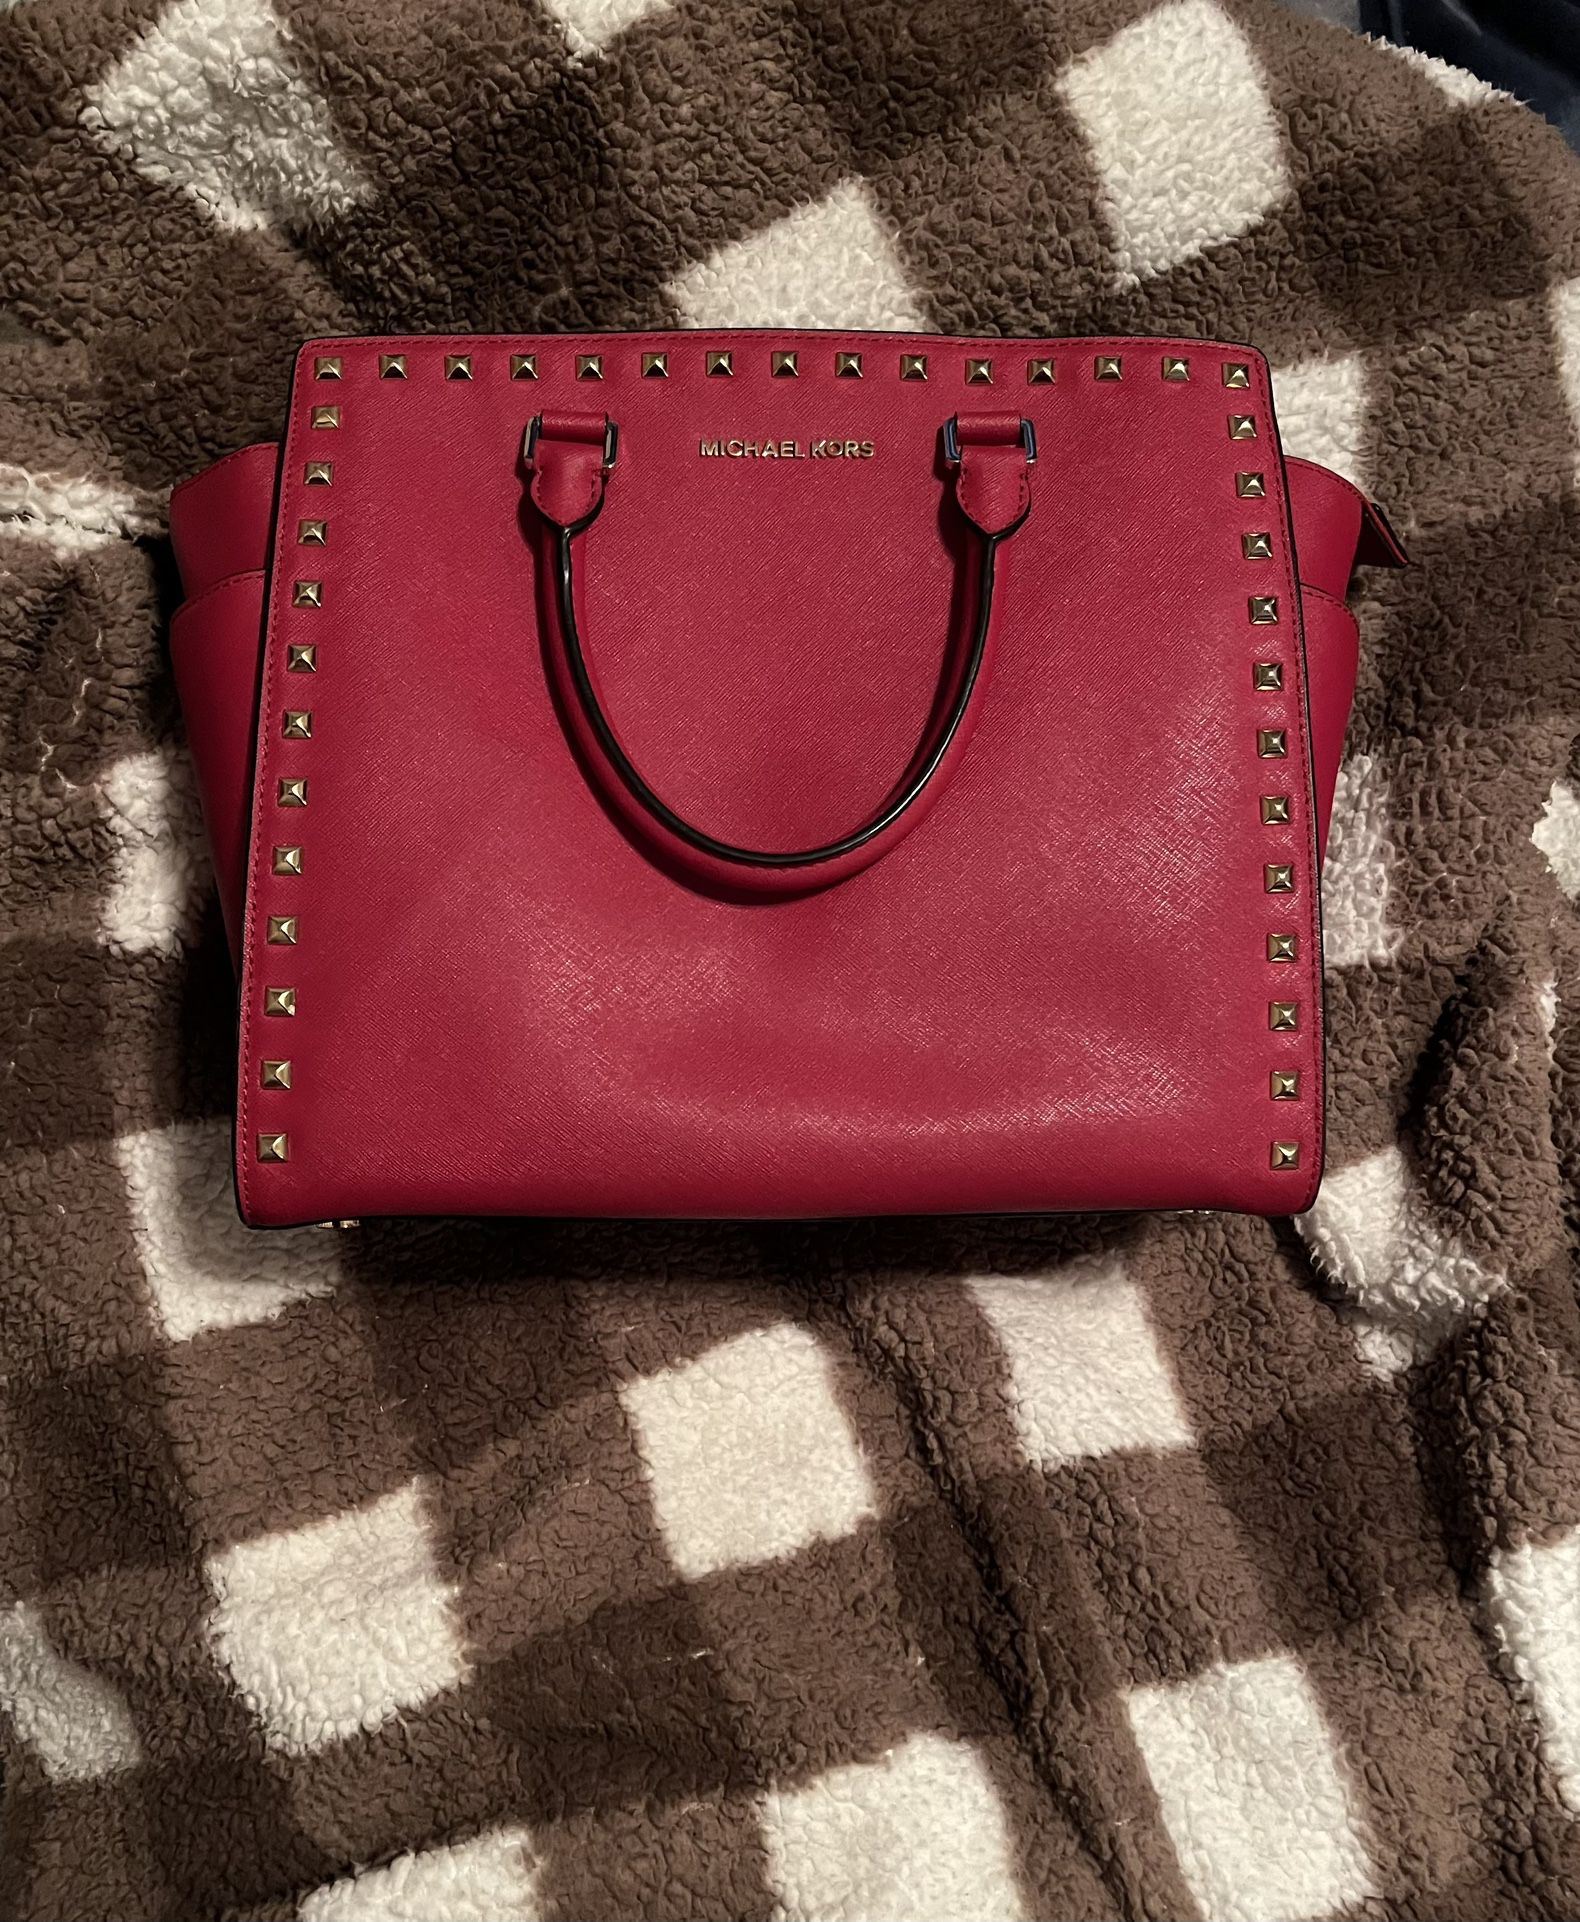 Michael Kors Good Condition for Sale in Glendale Heights, IL - OfferUp